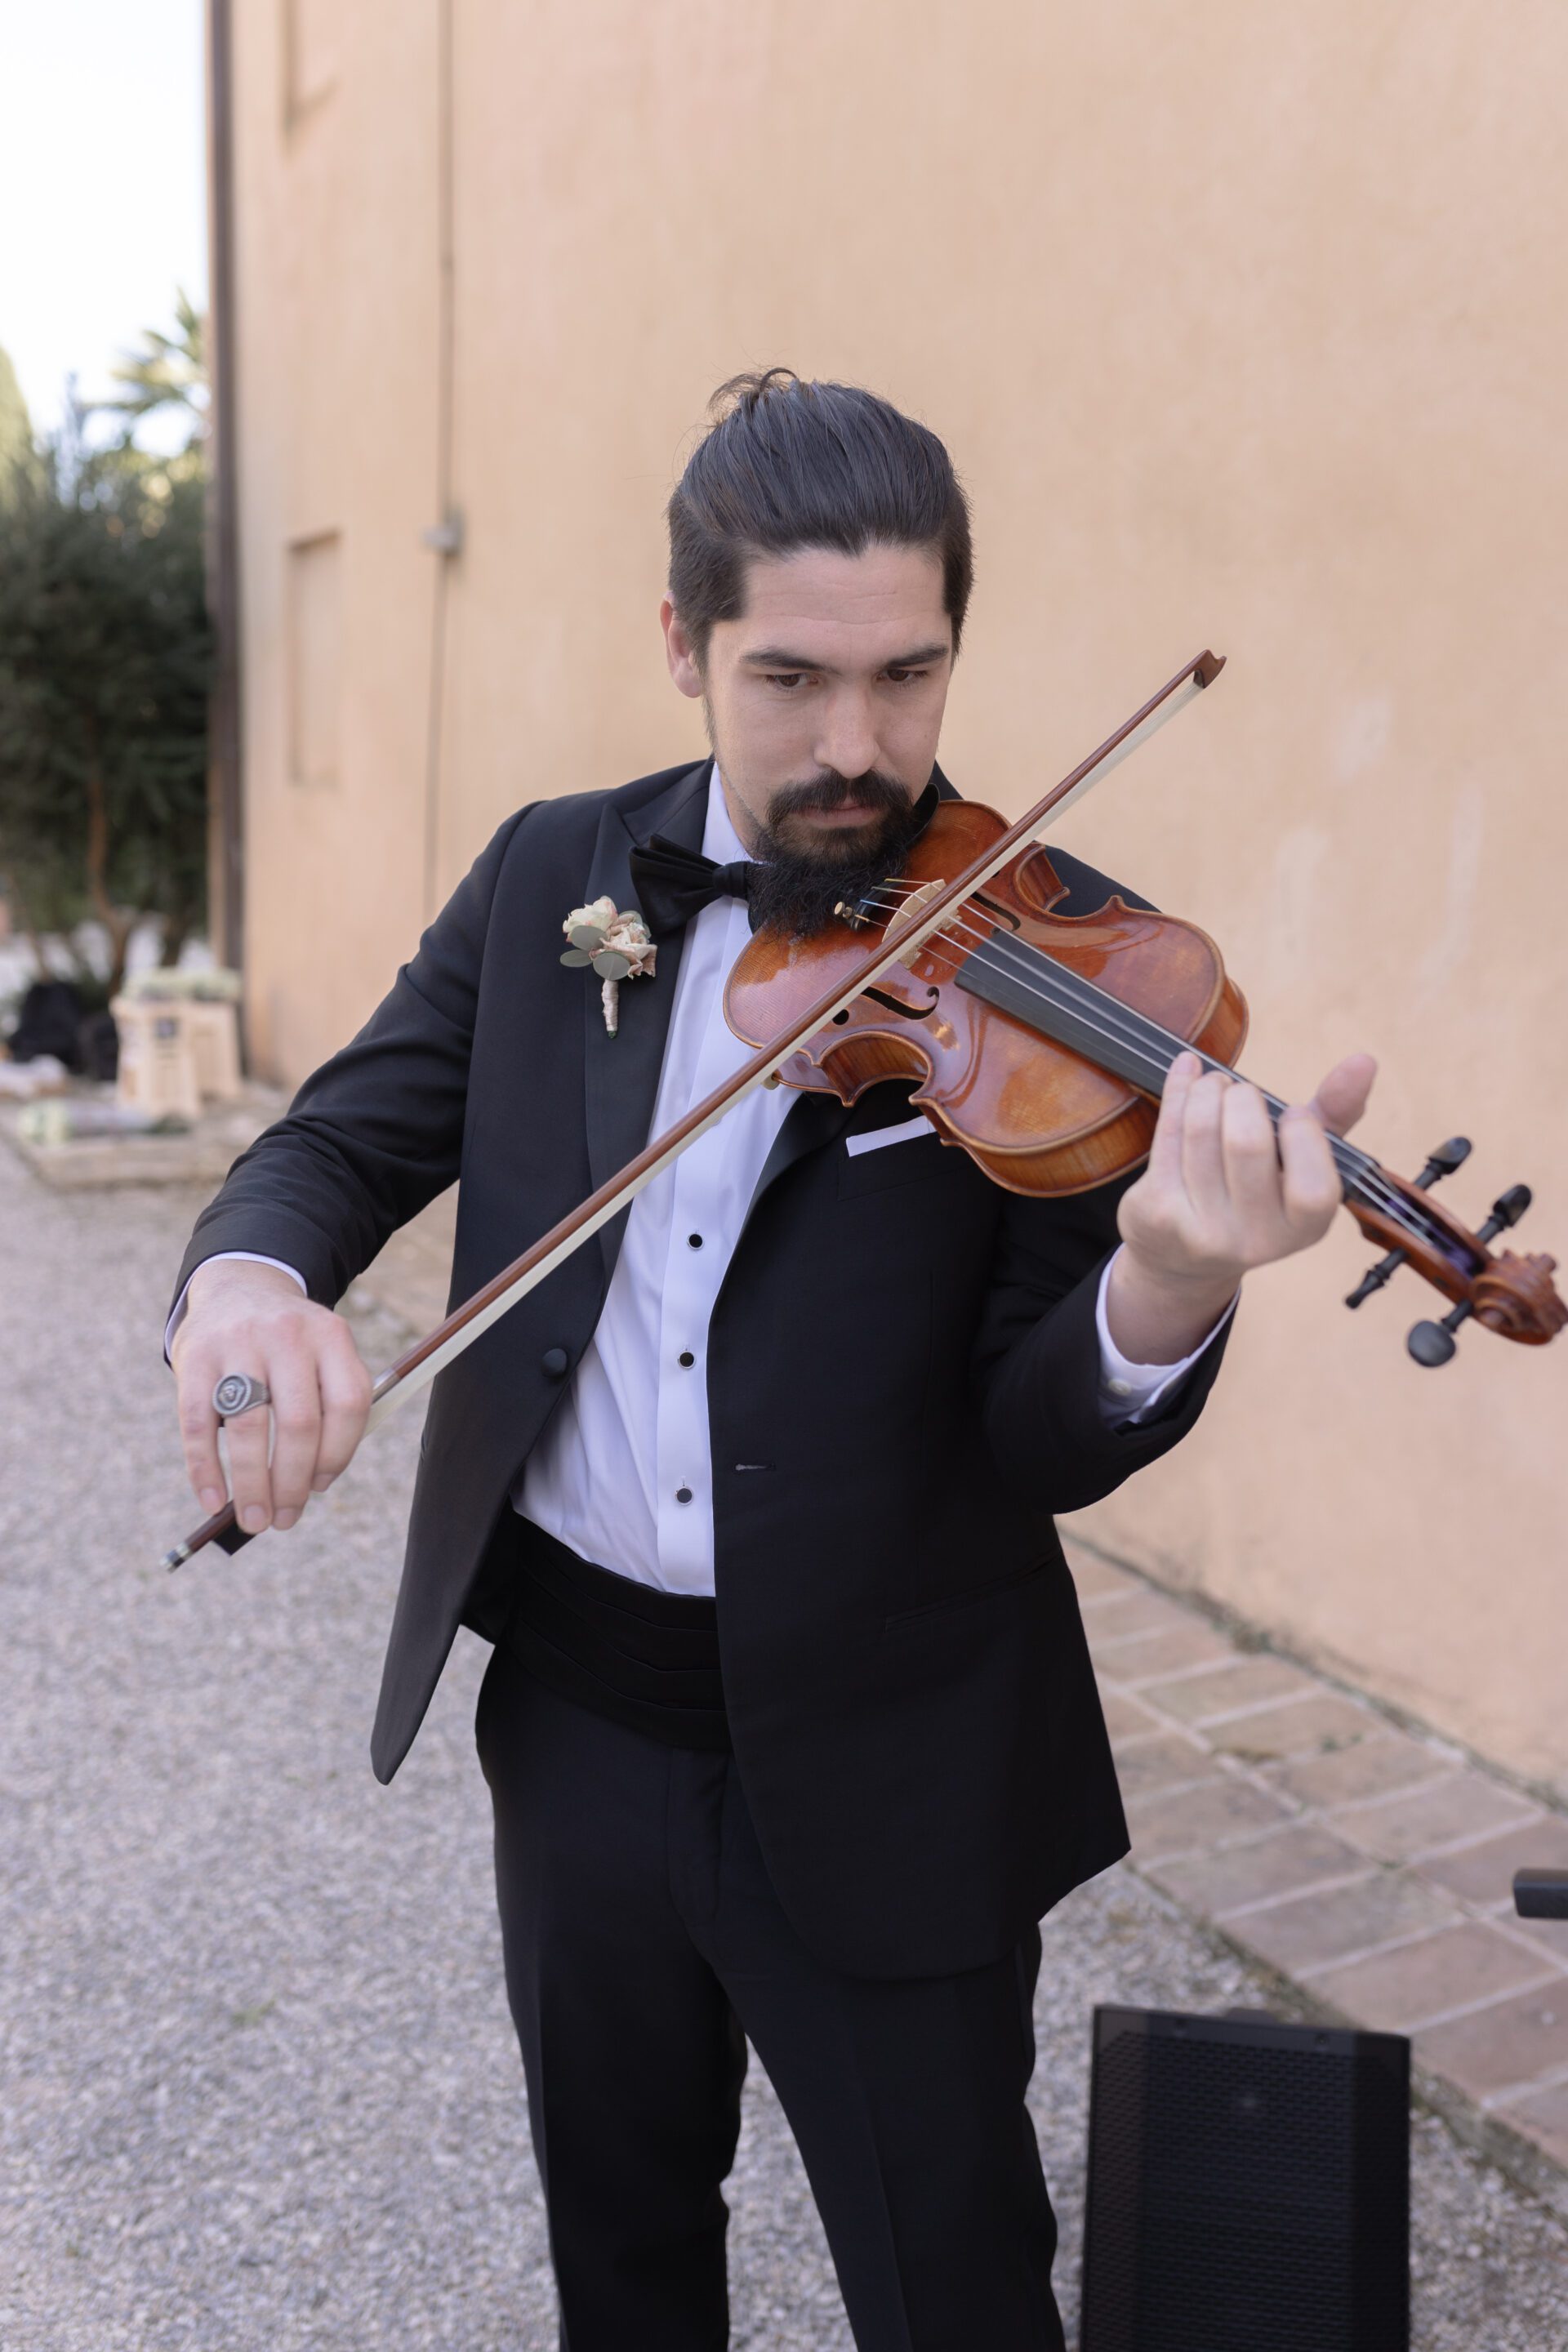 The groomsman plays the violin during the Italian wedding ceremony